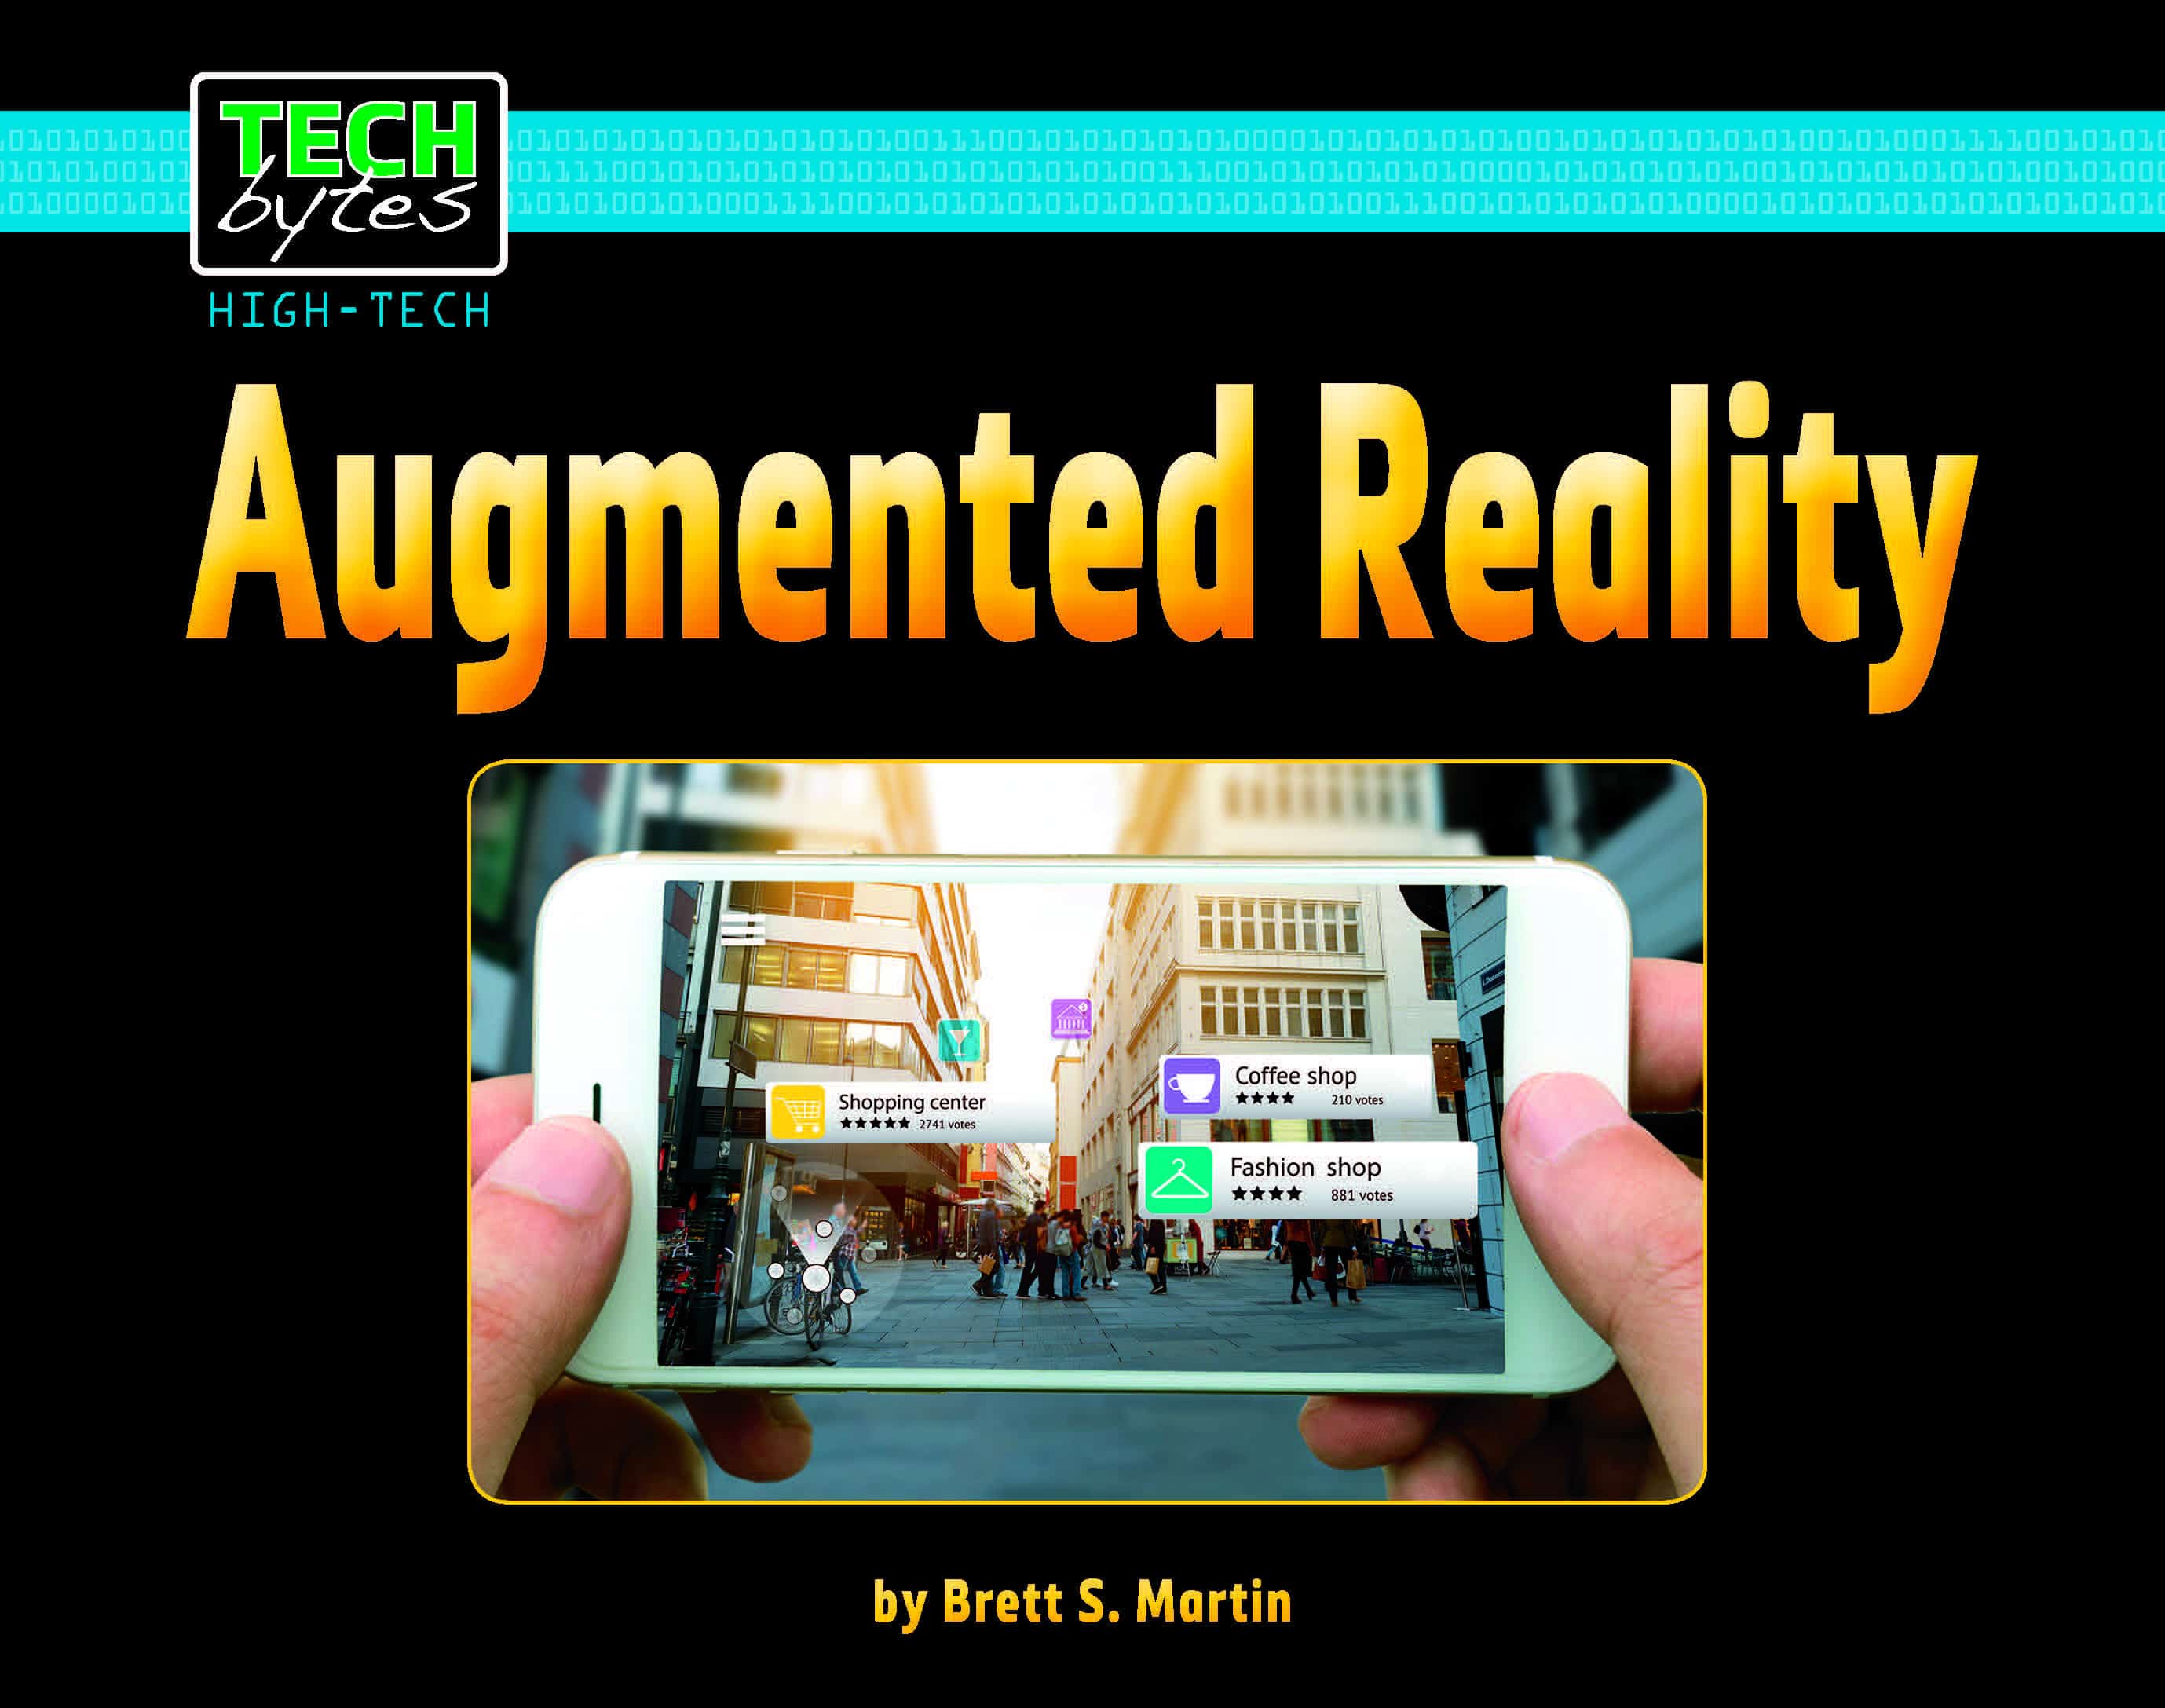 Augmented Realty